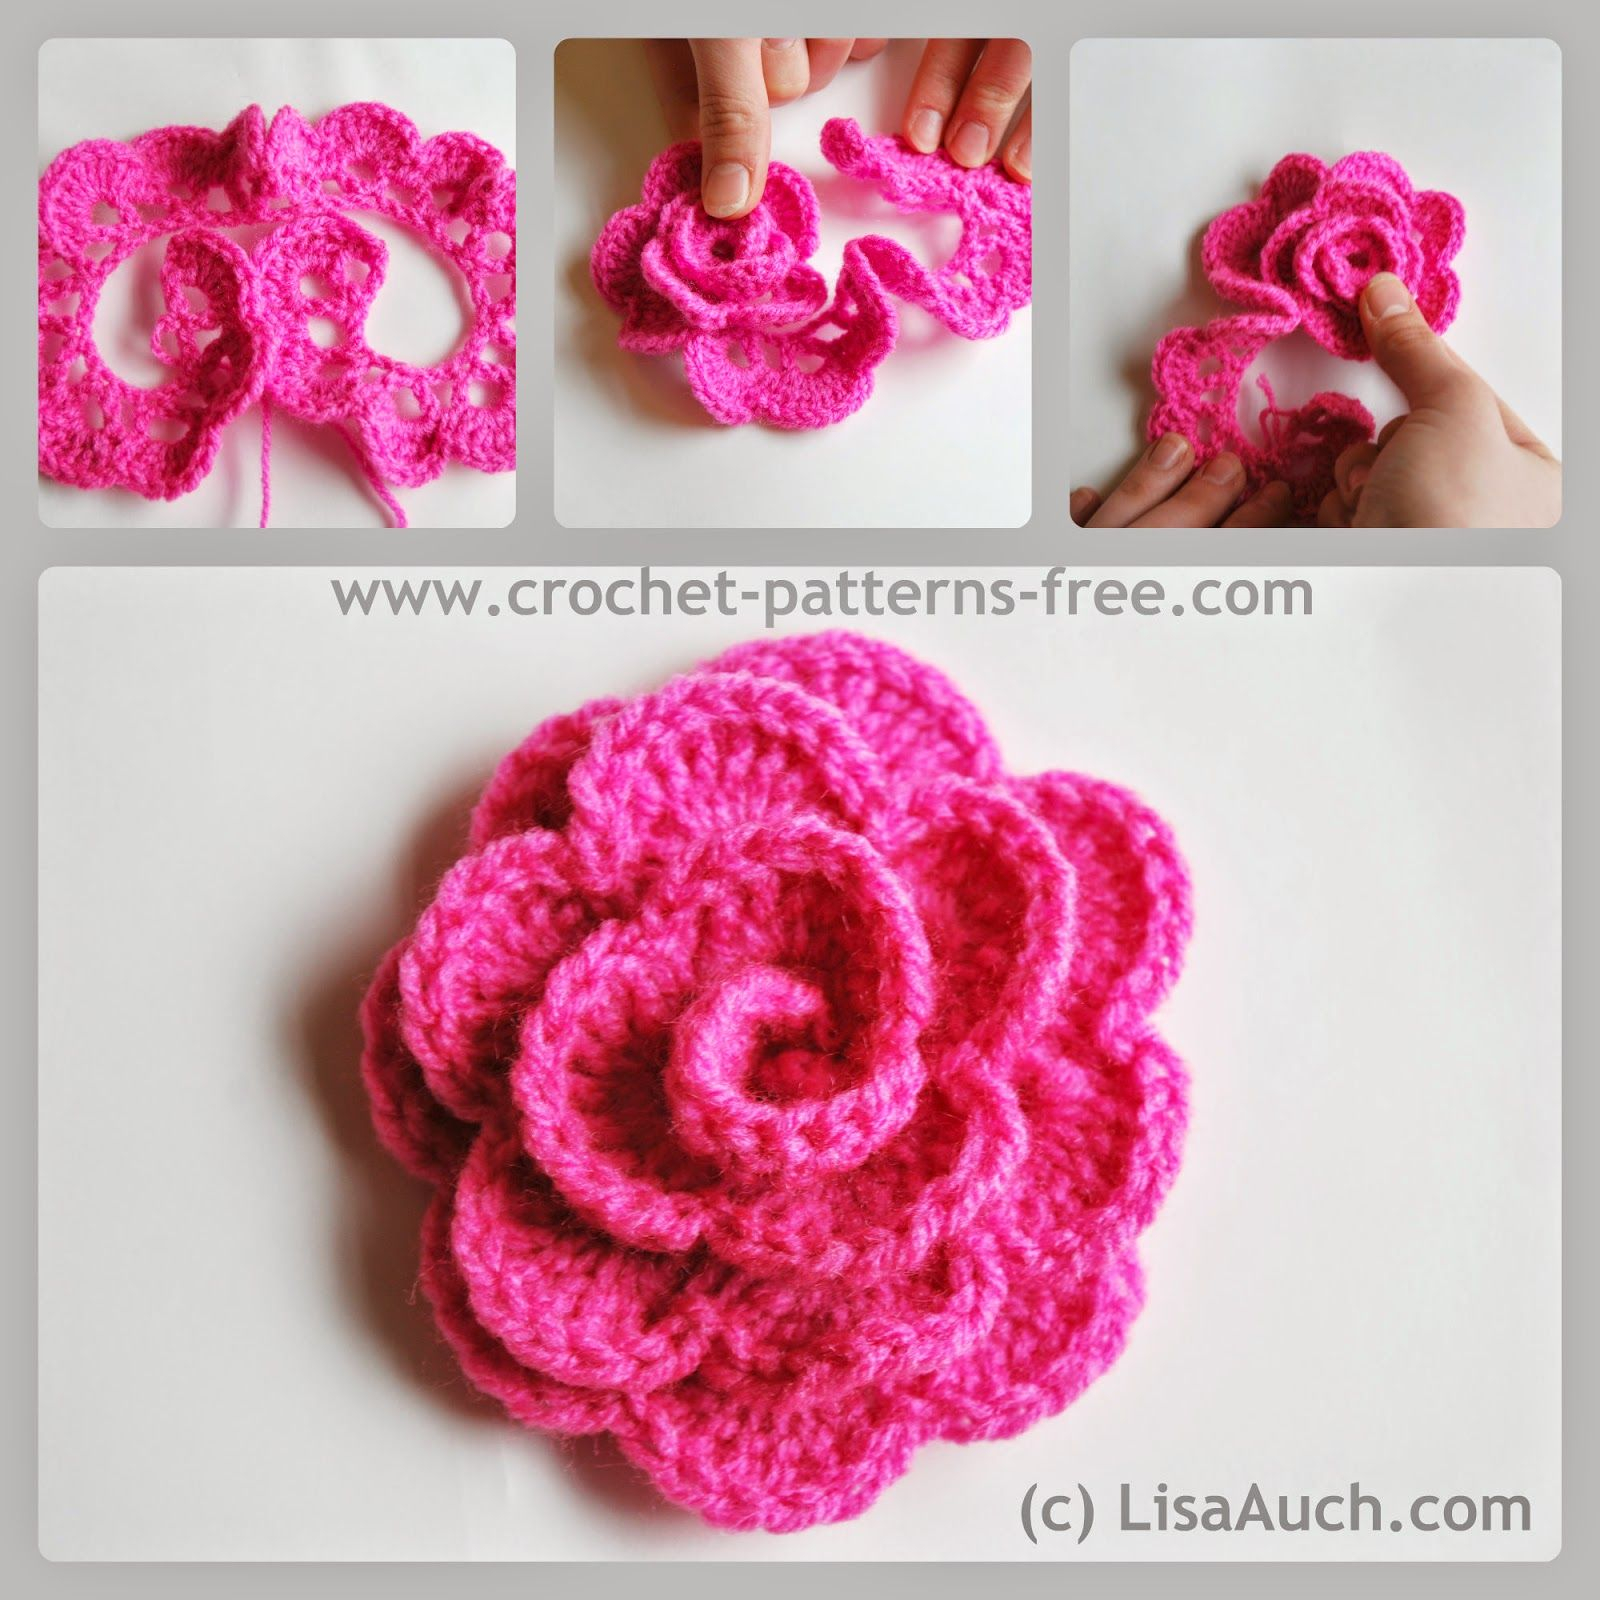 Crochet Rose Pattern Free Crochet Flower Pattern How To Crochet A Rose Sewing And